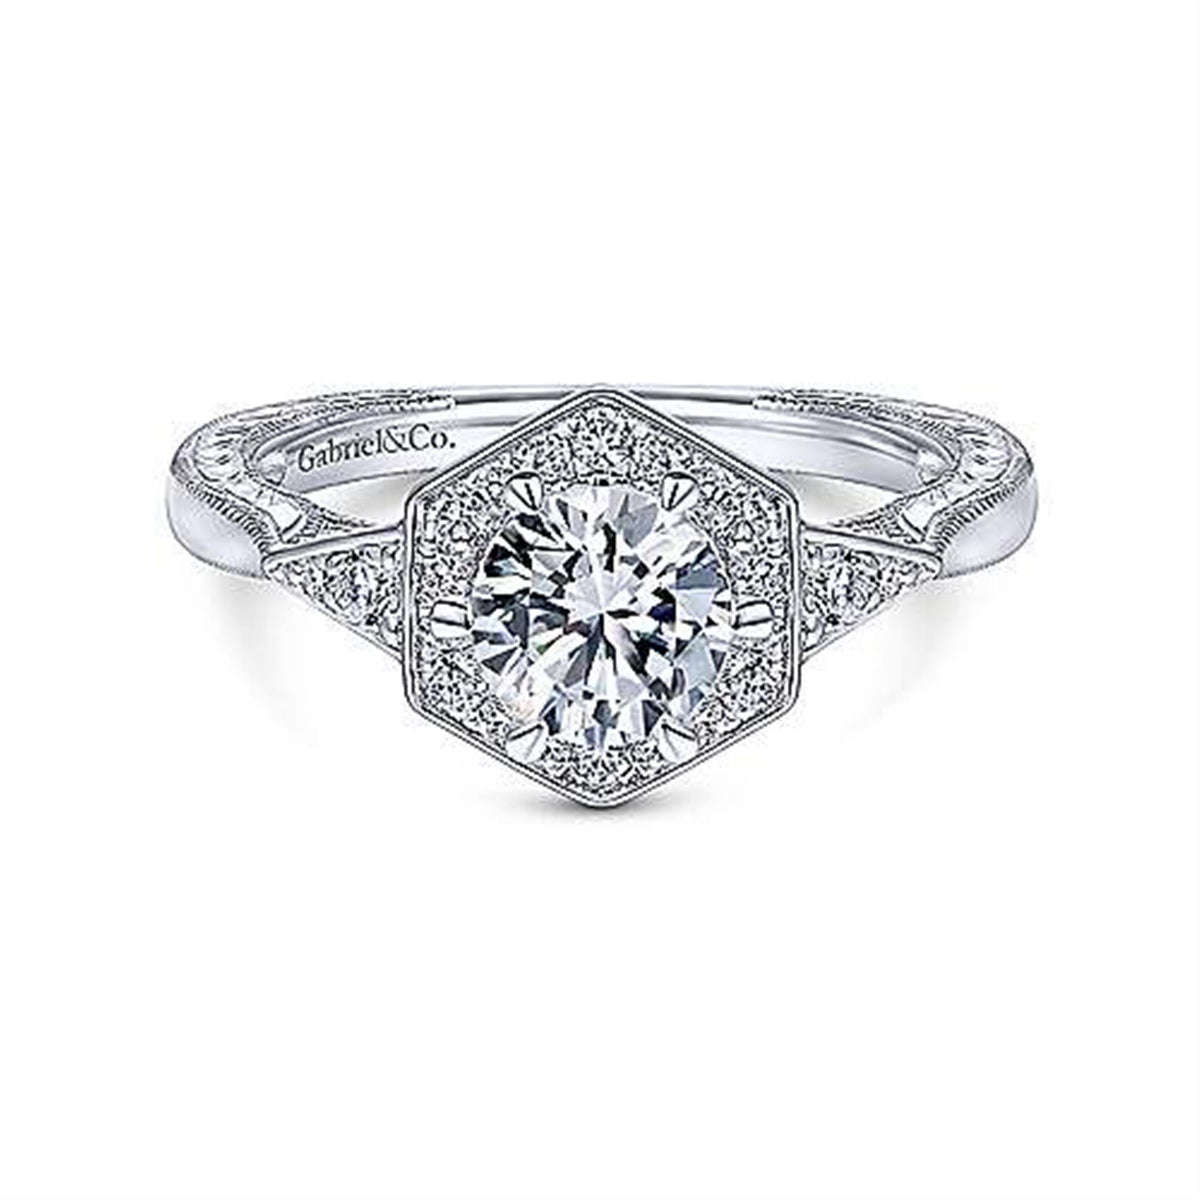 14Kt White Gold Vintage Inspired Engagement Ring With 0.70ct Natural Center Diamond